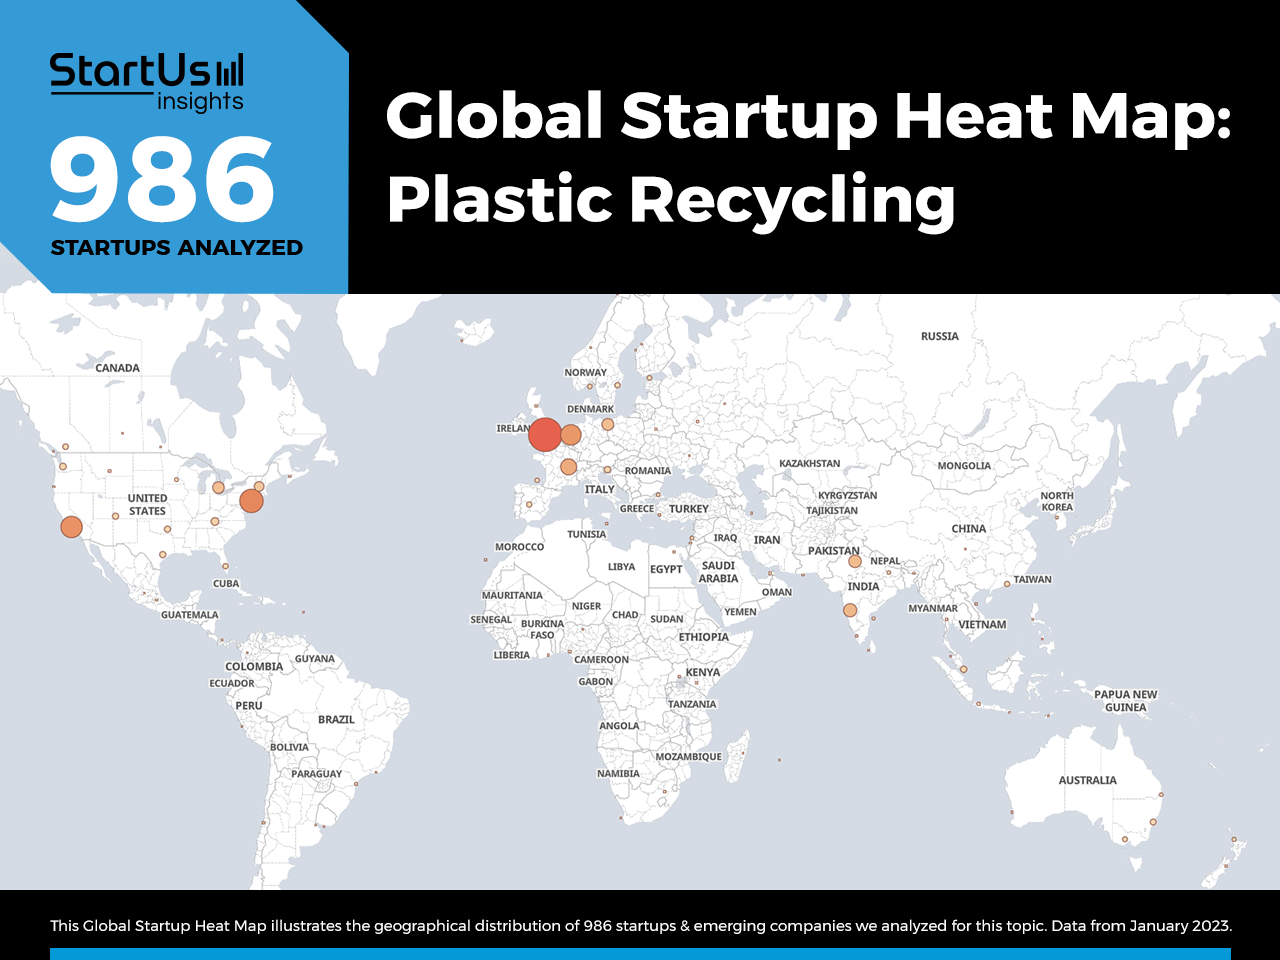 Plastic-Recycling-trends-innovation-Heat-Map-StartUs-Insights-noresize